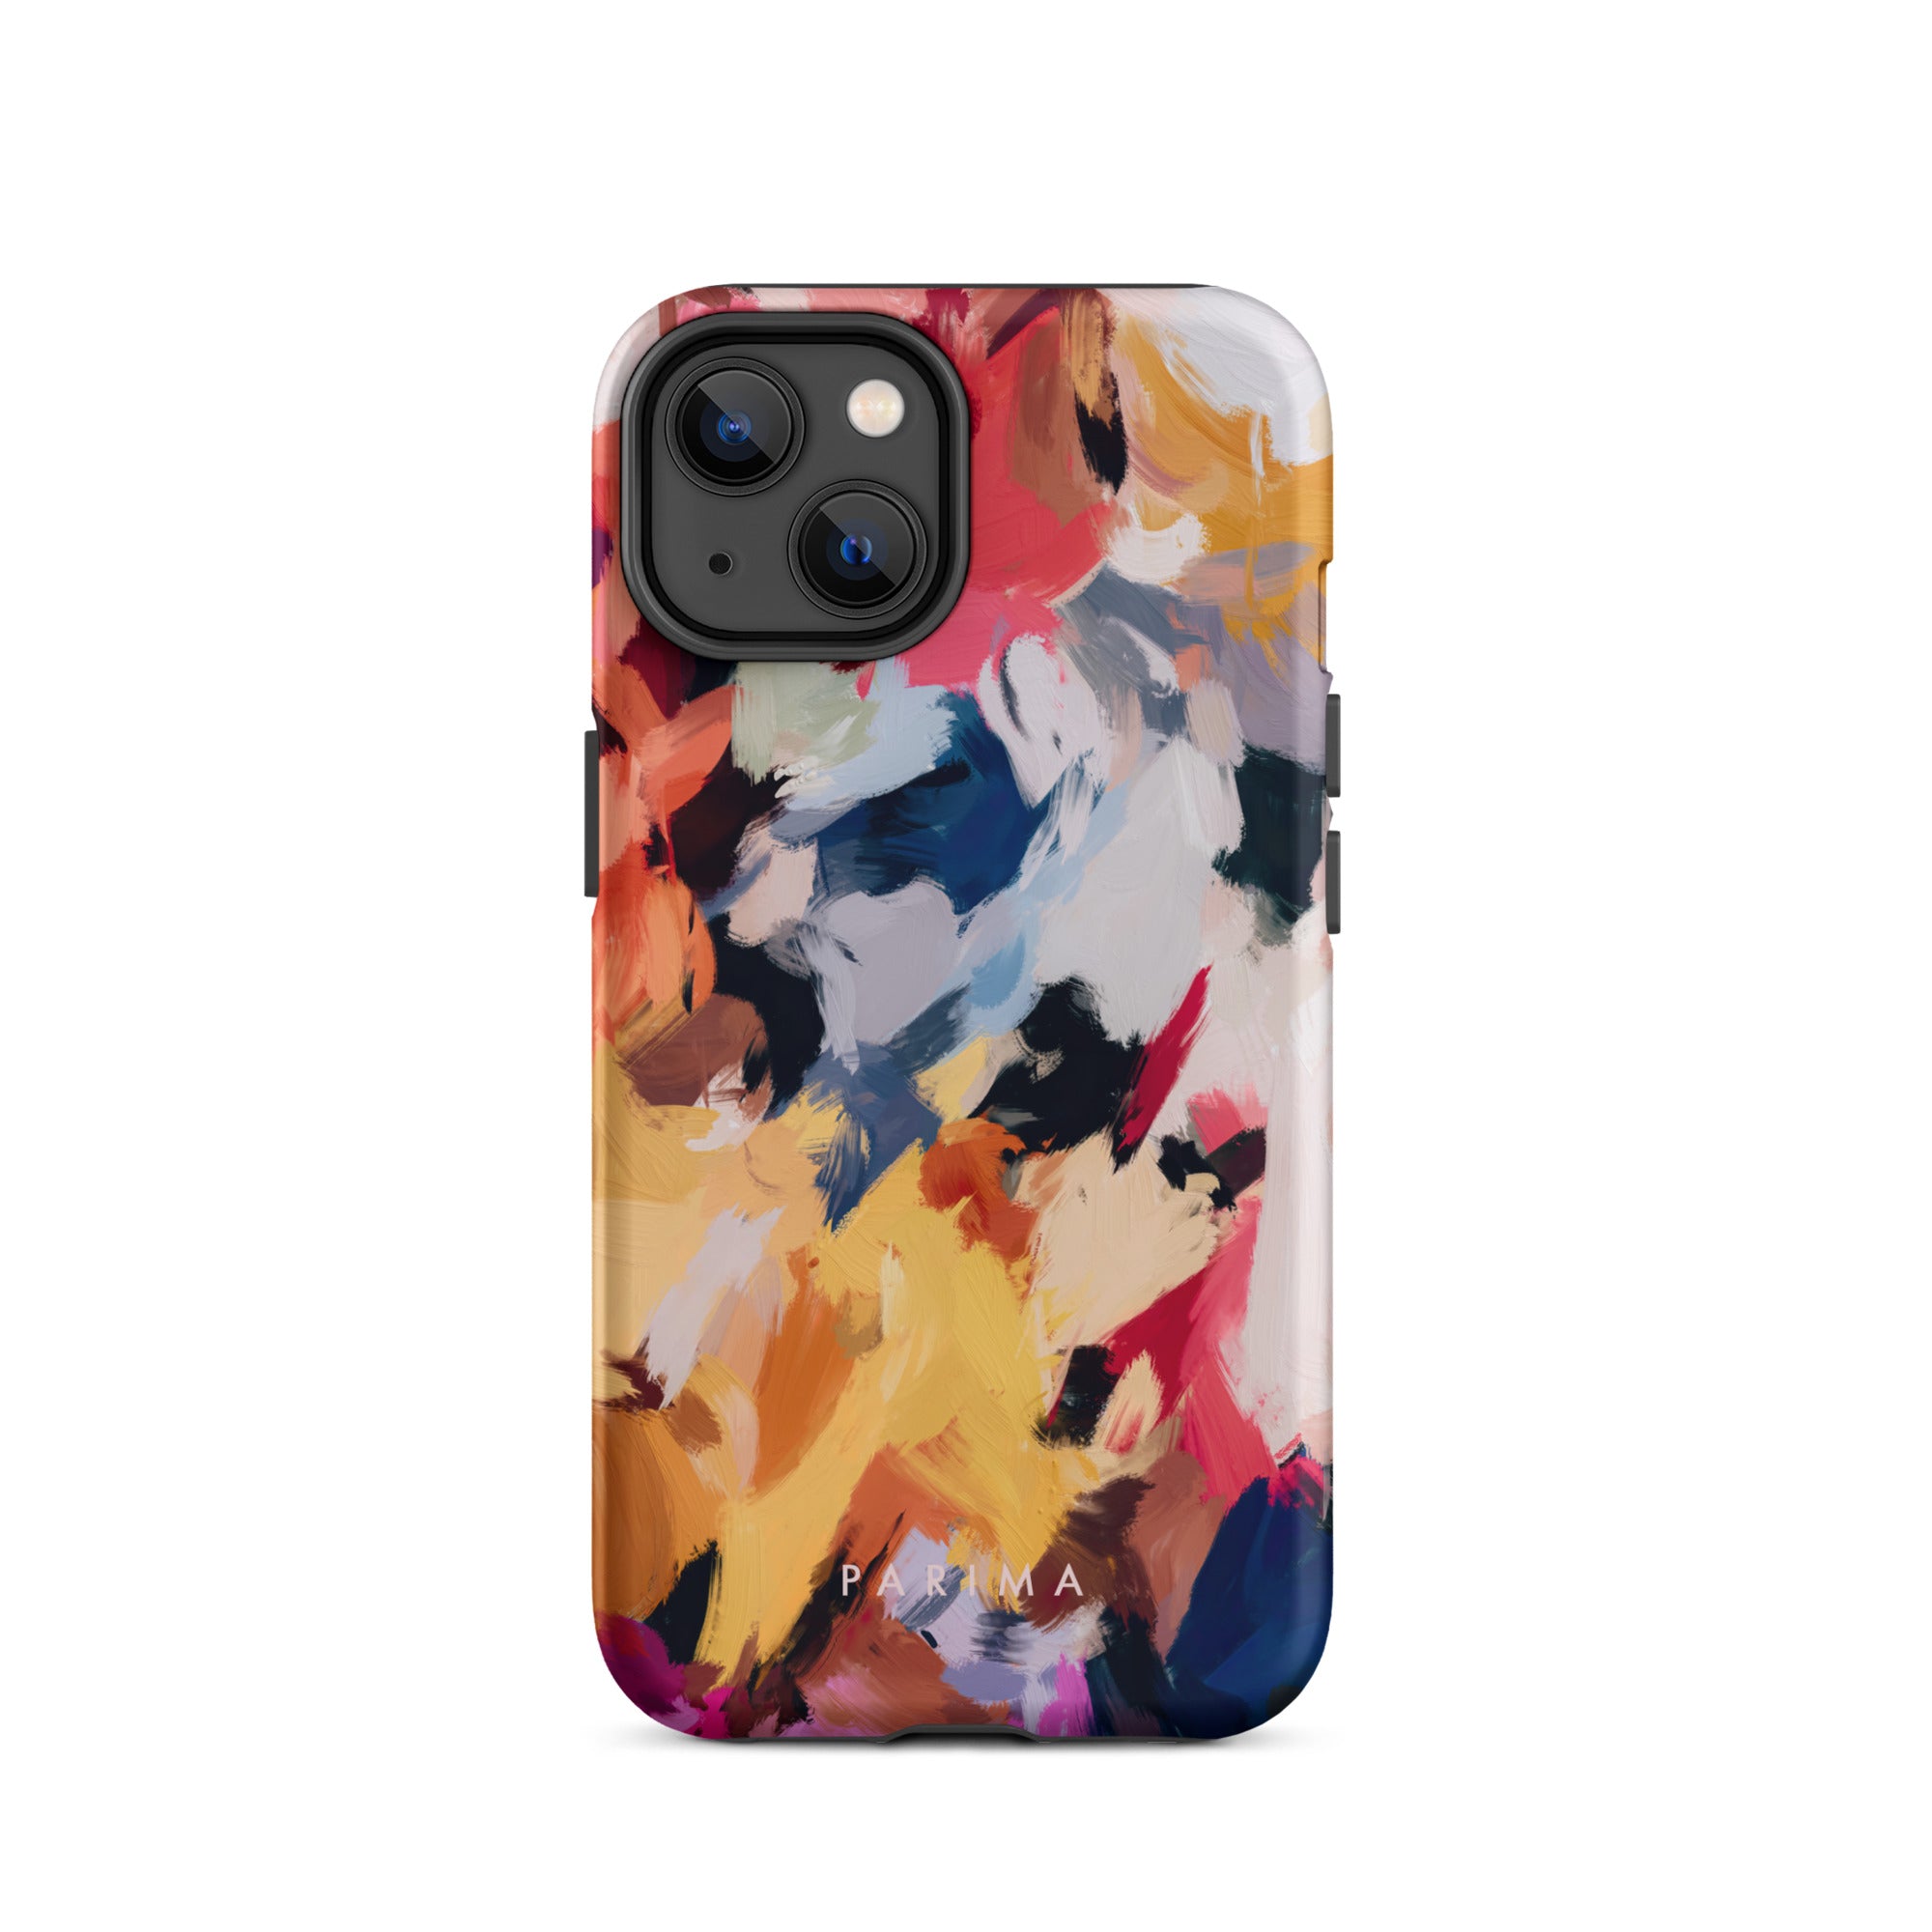 Wilde, blue and yellow abstract art on iPhone 14 tough case by Parima Studio